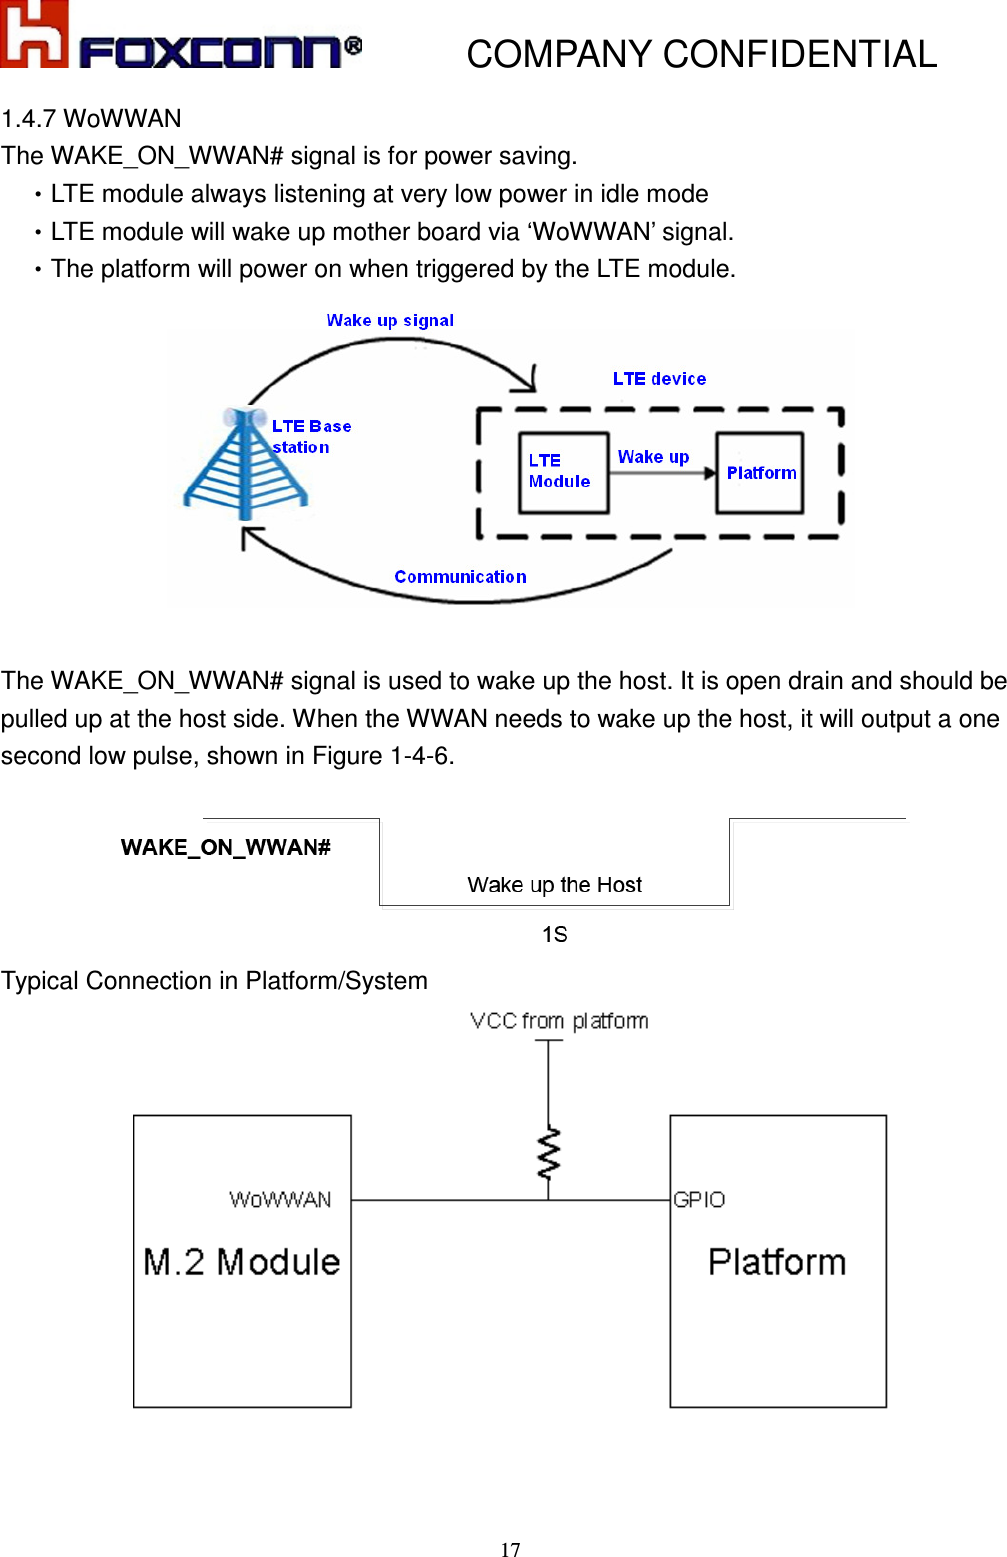           COMPANY CONFIDENTIAL    17 1.4.7 WoWWAN The WAKE_ON_WWAN# signal is for power saving.   •LTE module always listening at very low power in idle mode •LTE module will wake up mother board via ‘WoWWAN’ signal. •The platform will power on when triggered by the LTE module.   The WAKE_ON_WWAN# signal is used to wake up the host. It is open drain and should be pulled up at the host side. When the WWAN needs to wake up the host, it will output a one second low pulse, shown in Figure 1-4-6.  Typical Connection in Platform/System   